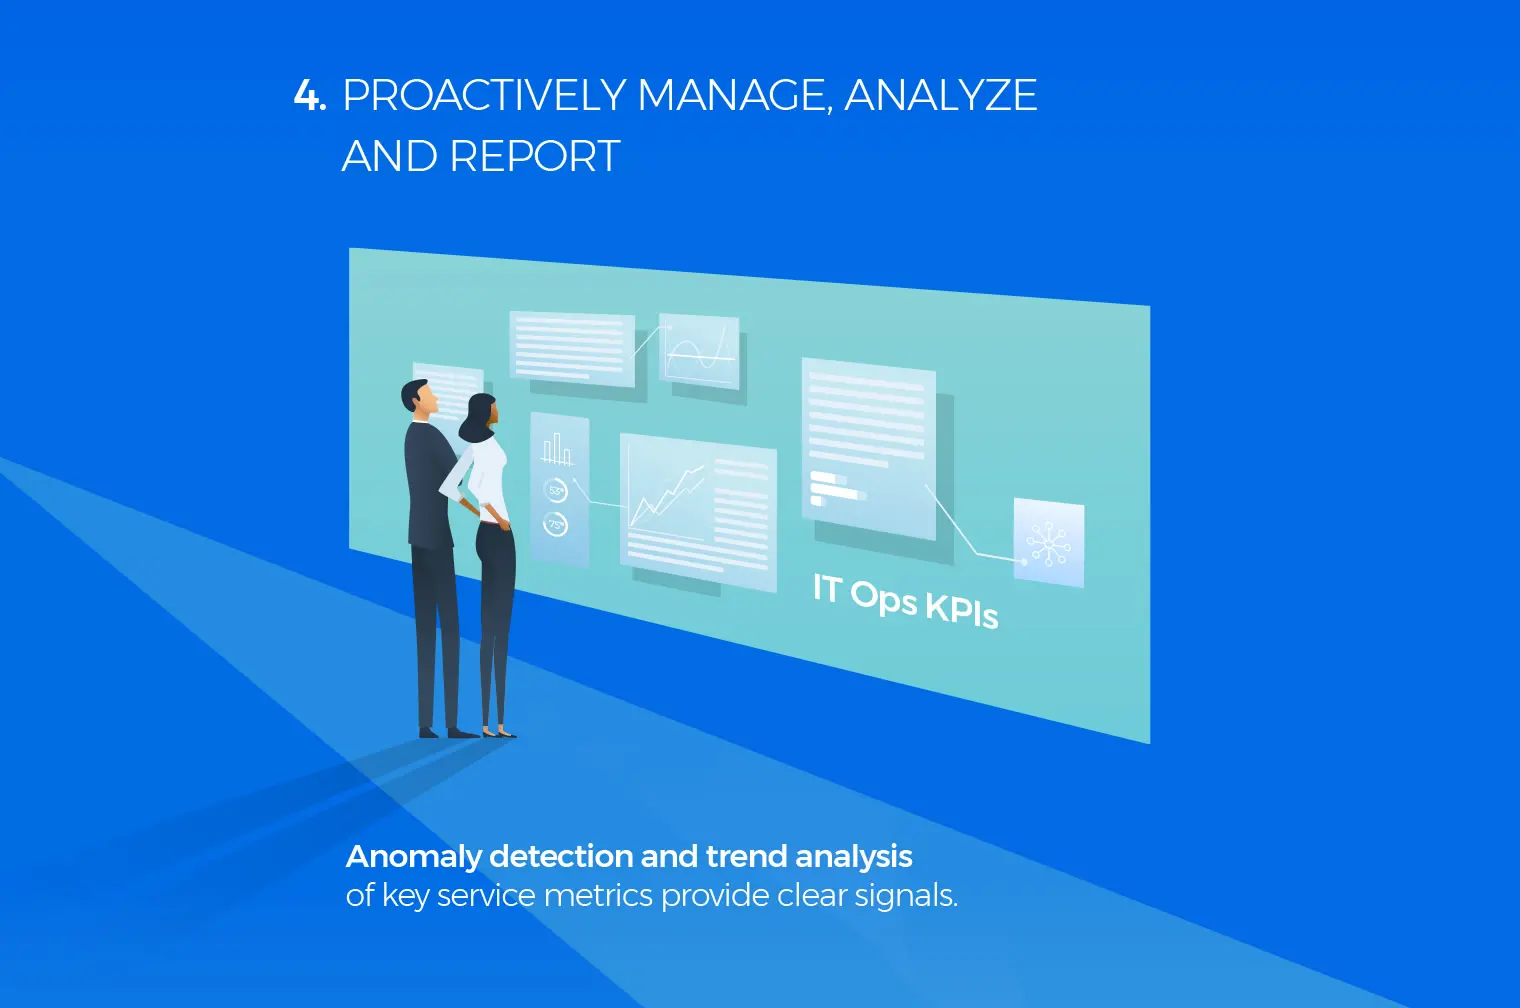 4. Proactively Manage, Analyze and Report